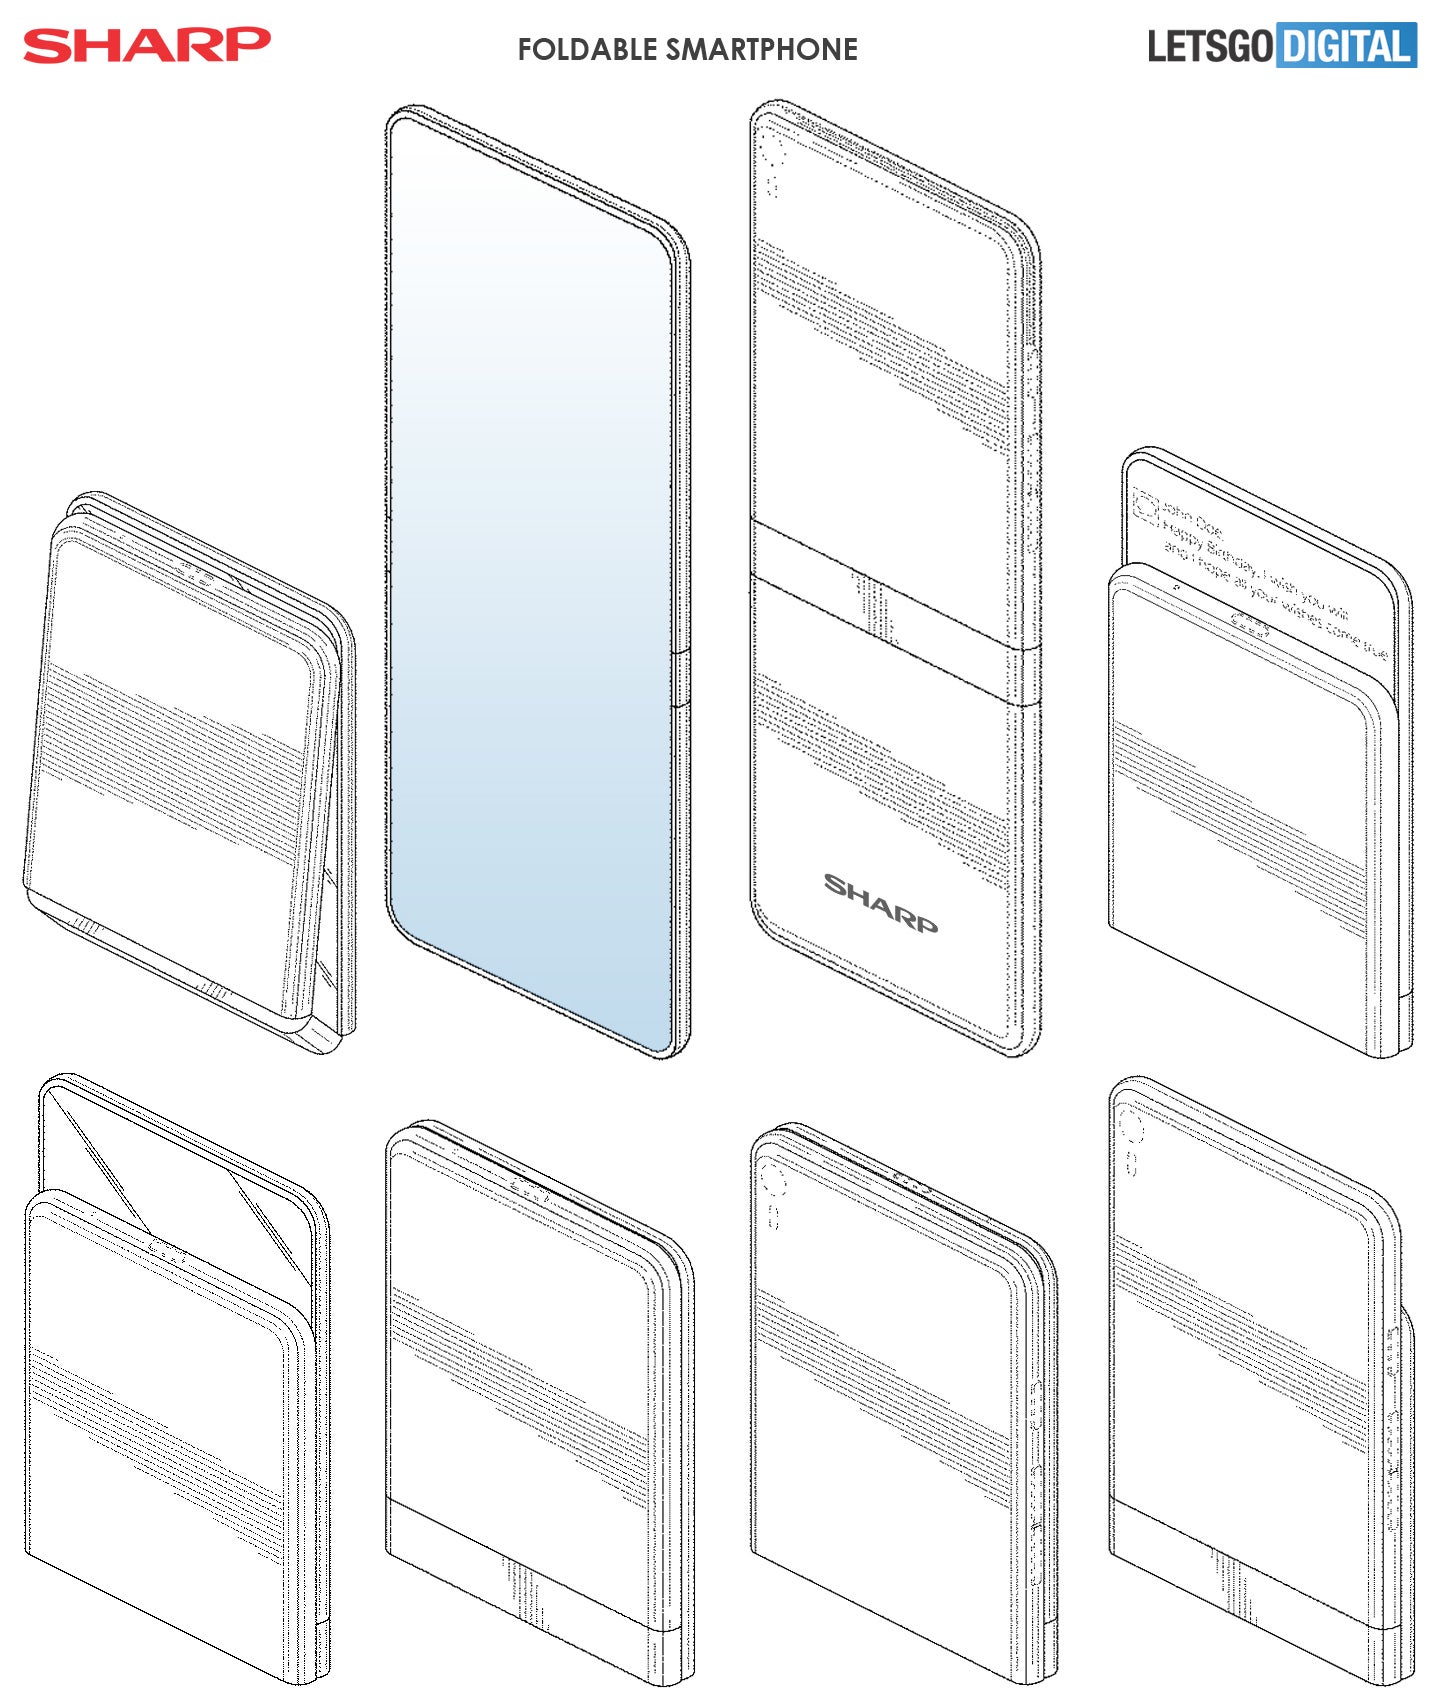 Sharp has patented a sleek foldable phone with two hinges